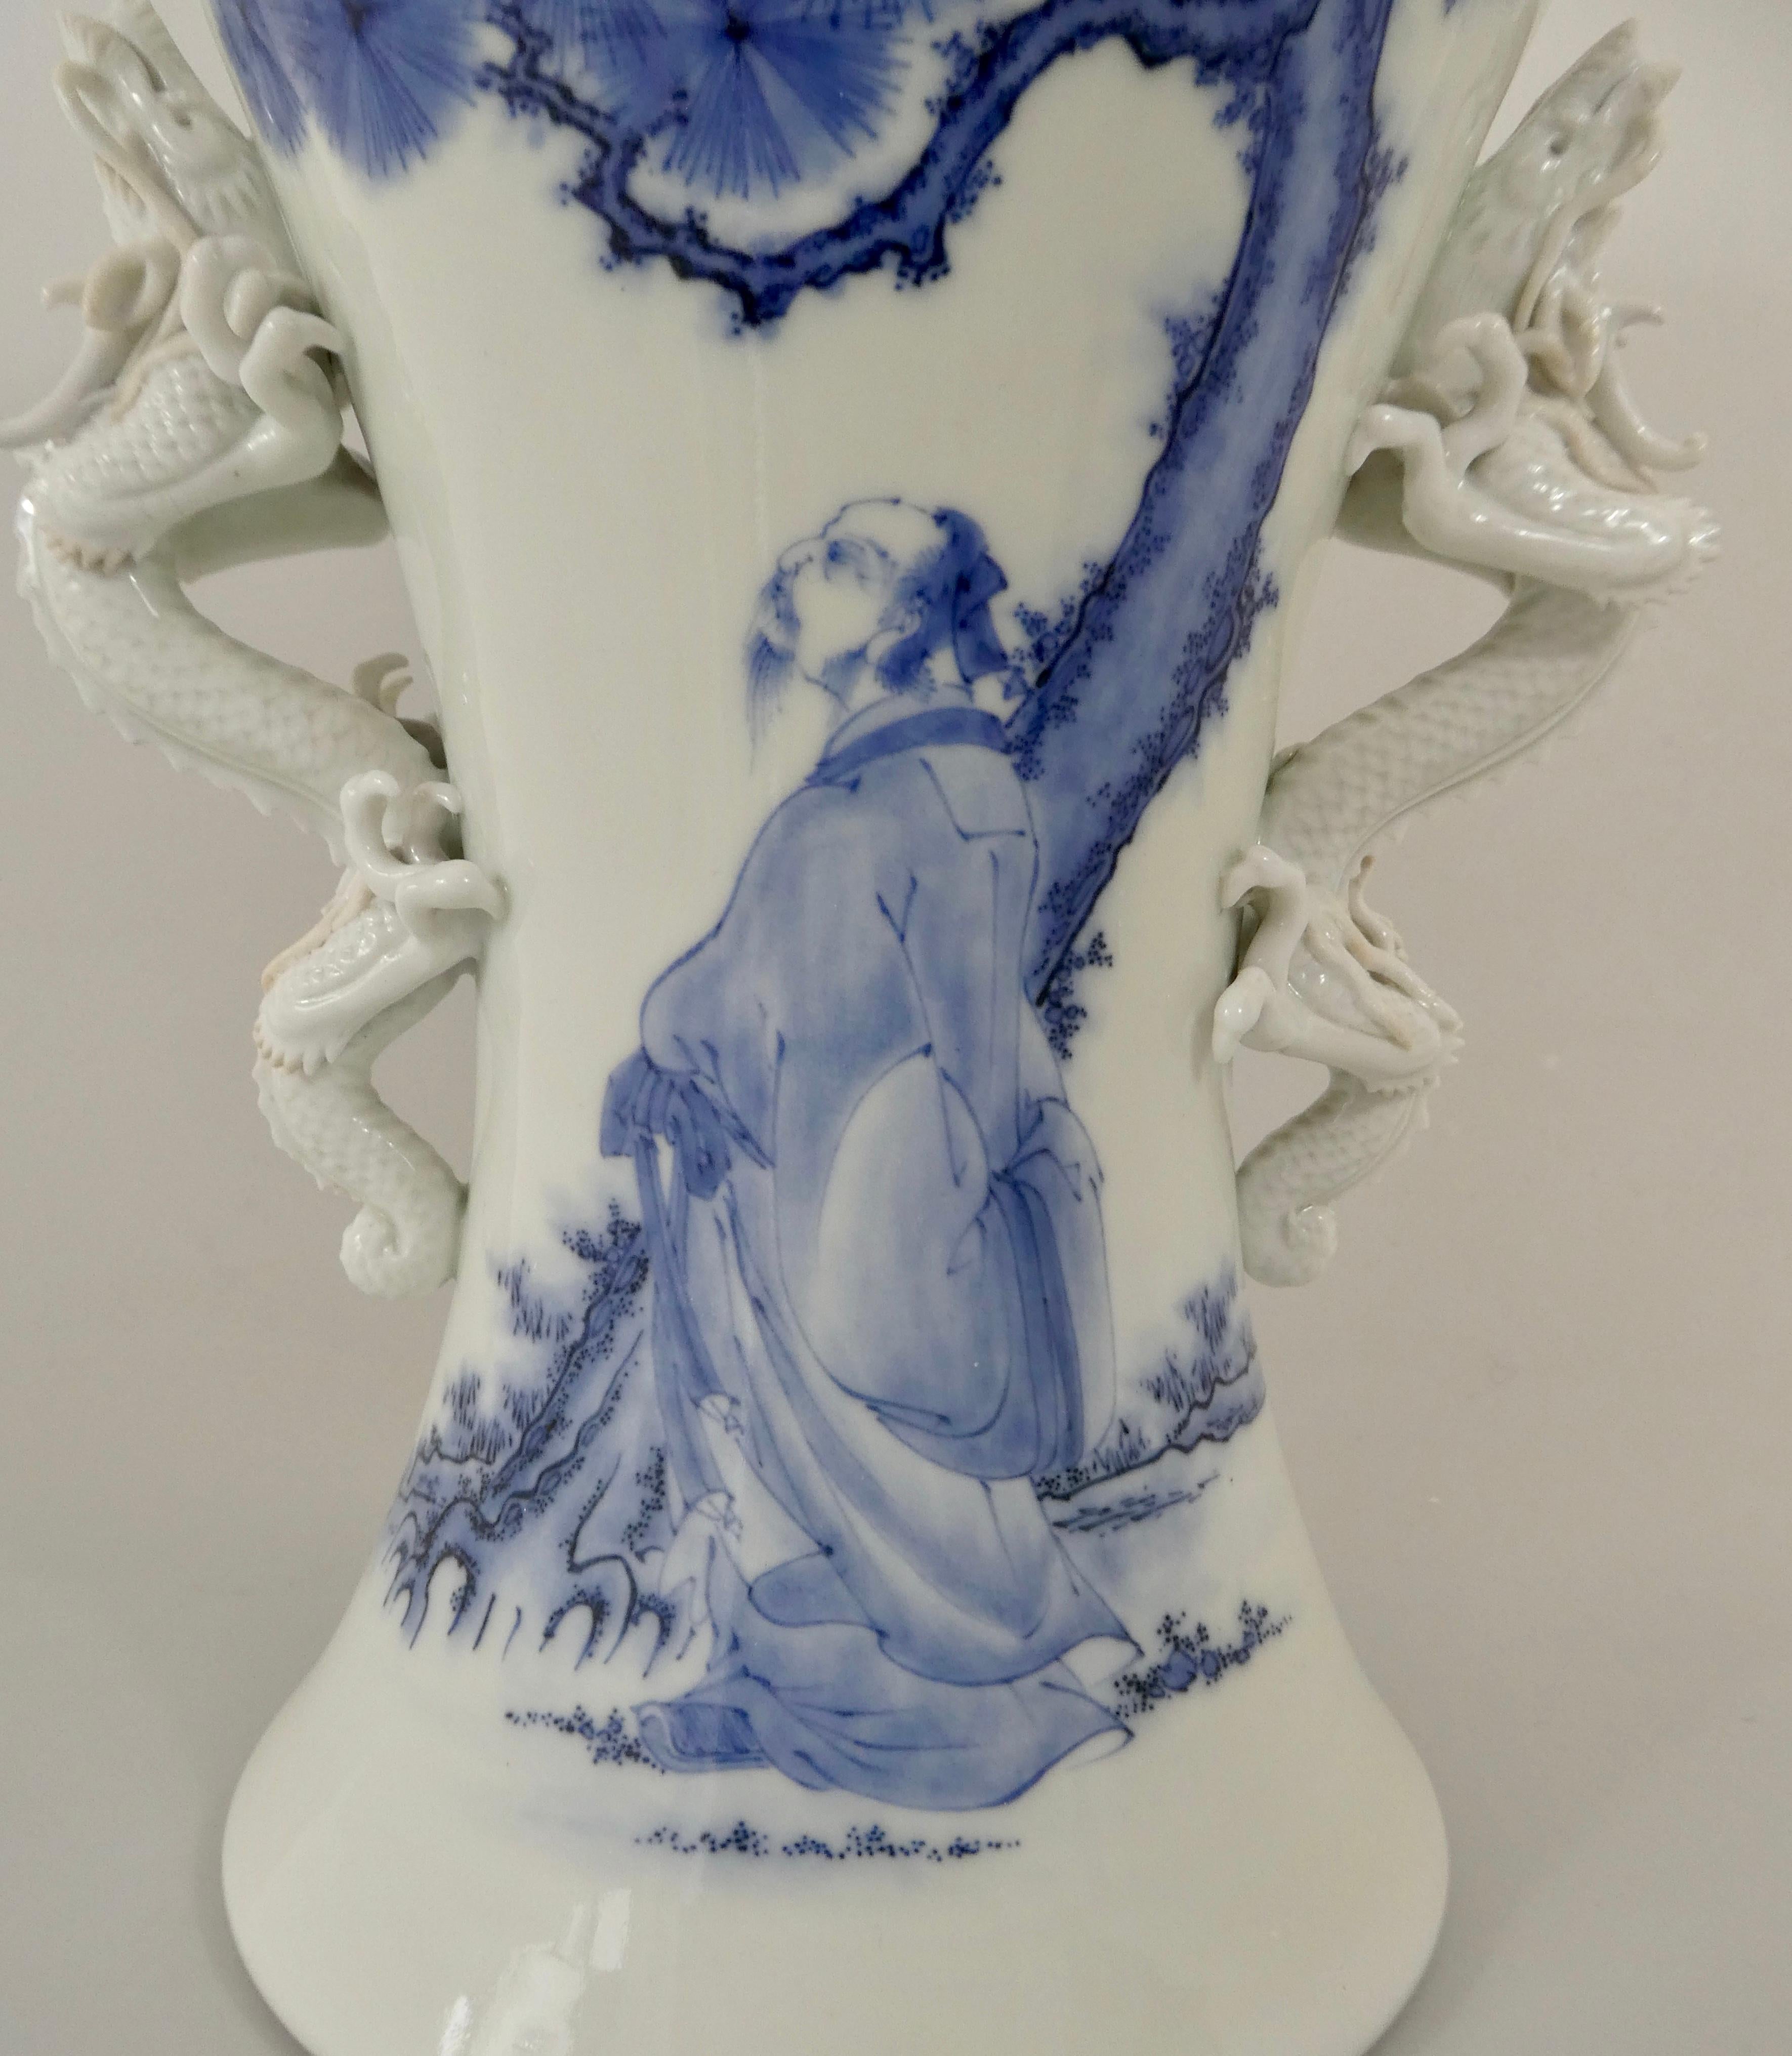 A fine Hirado porcelain vase, Japanese, c. 1870. Meiji Period. Painted in underglaze blue, to the front, with a scholar, contemplating life, whilst stood beneath a large pine tree. The reverse with a young boy attendant holding a fan. 
Either side